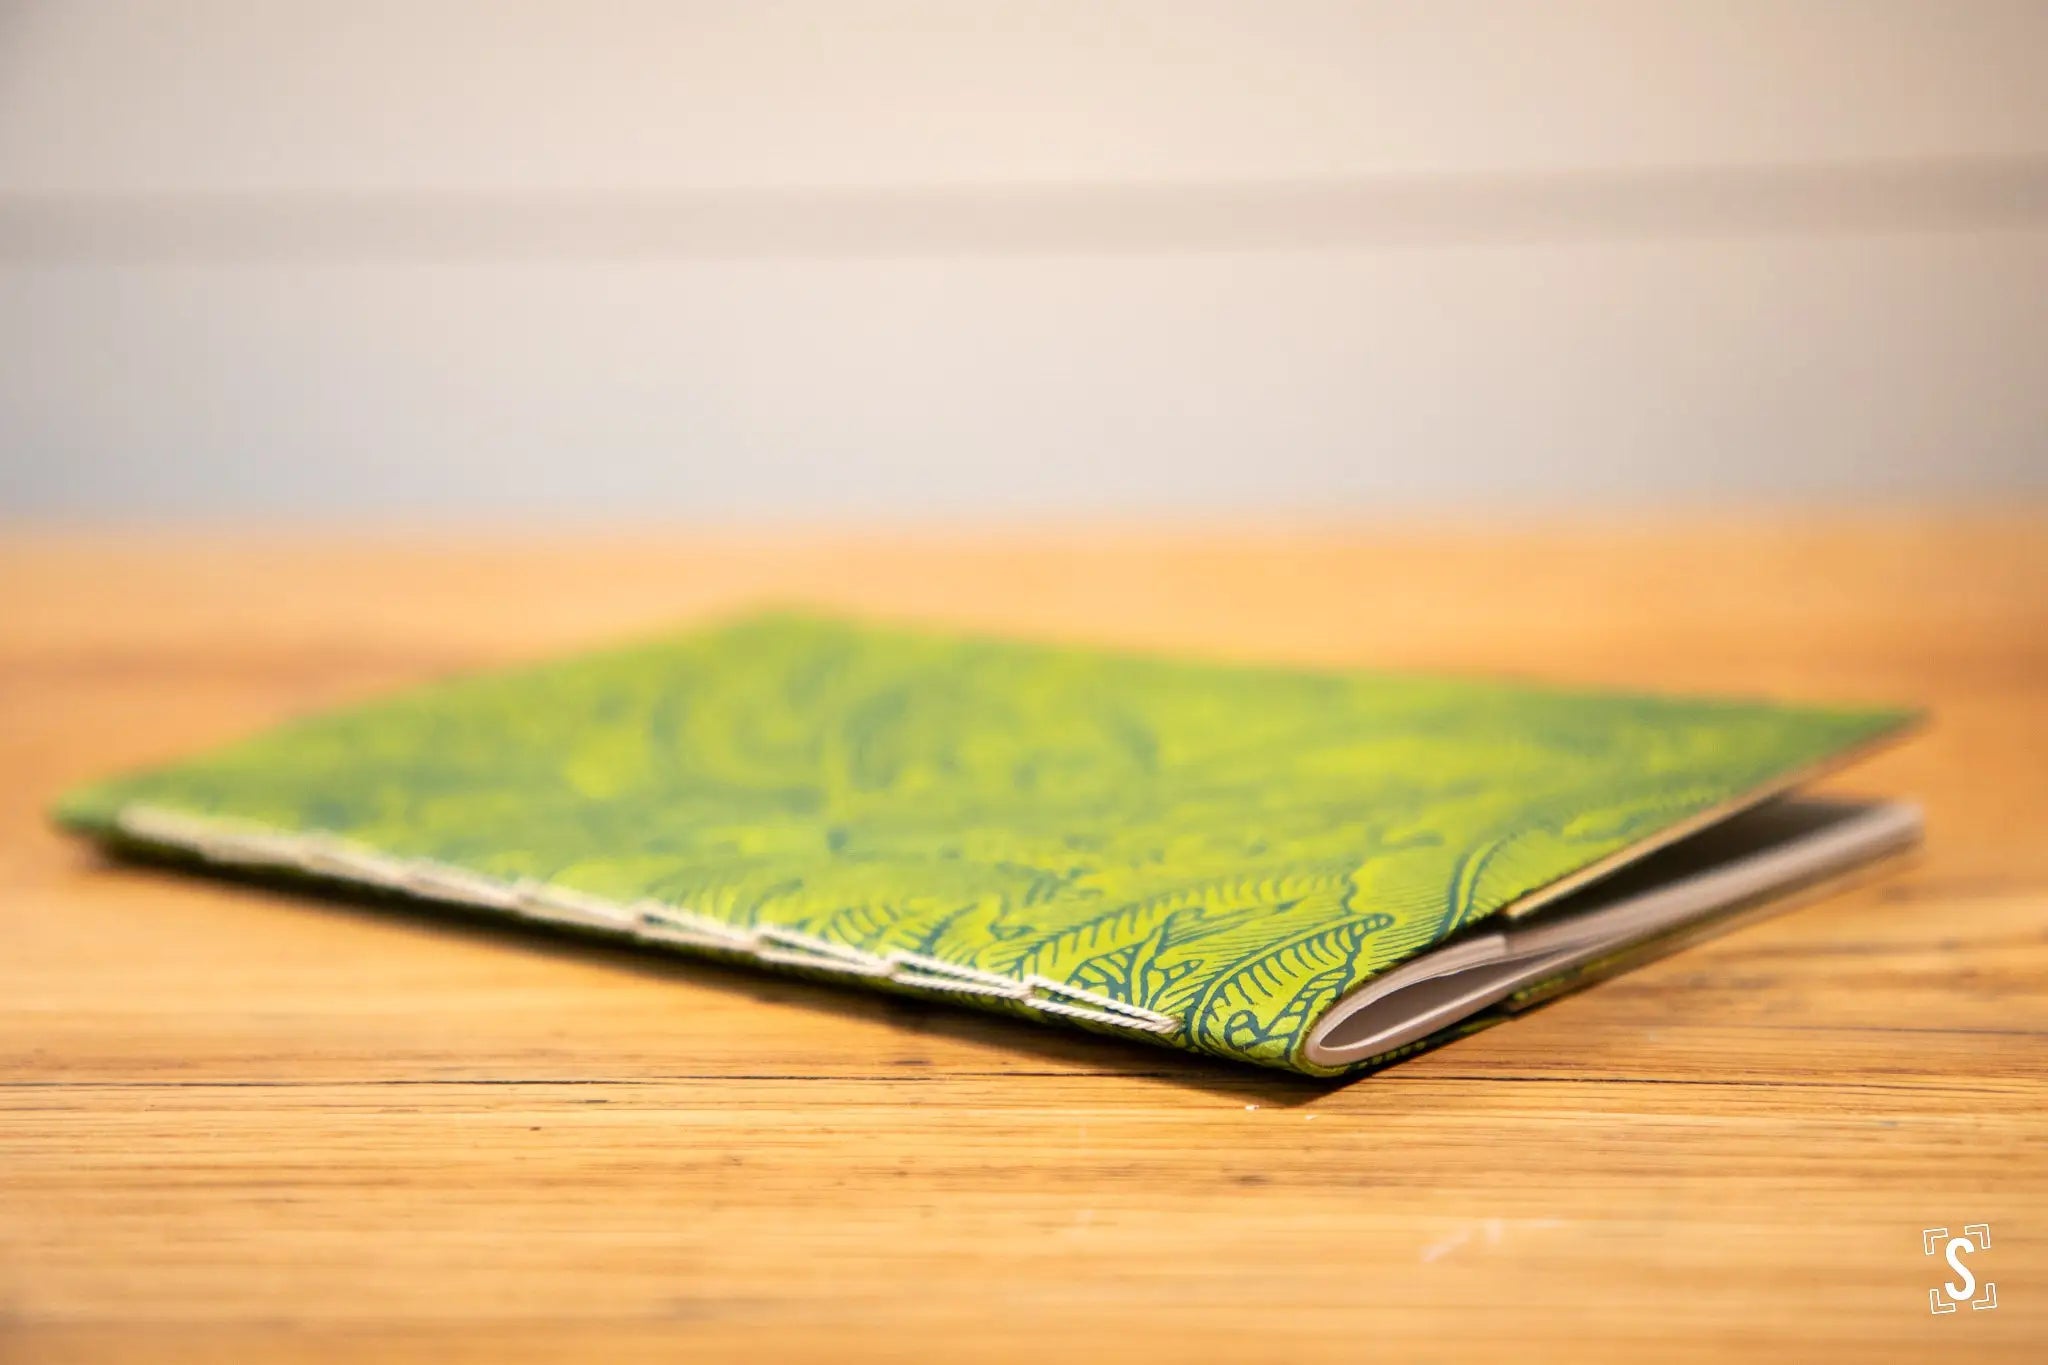 Green notebook or journal with an ornate leaf pattern on its cover.